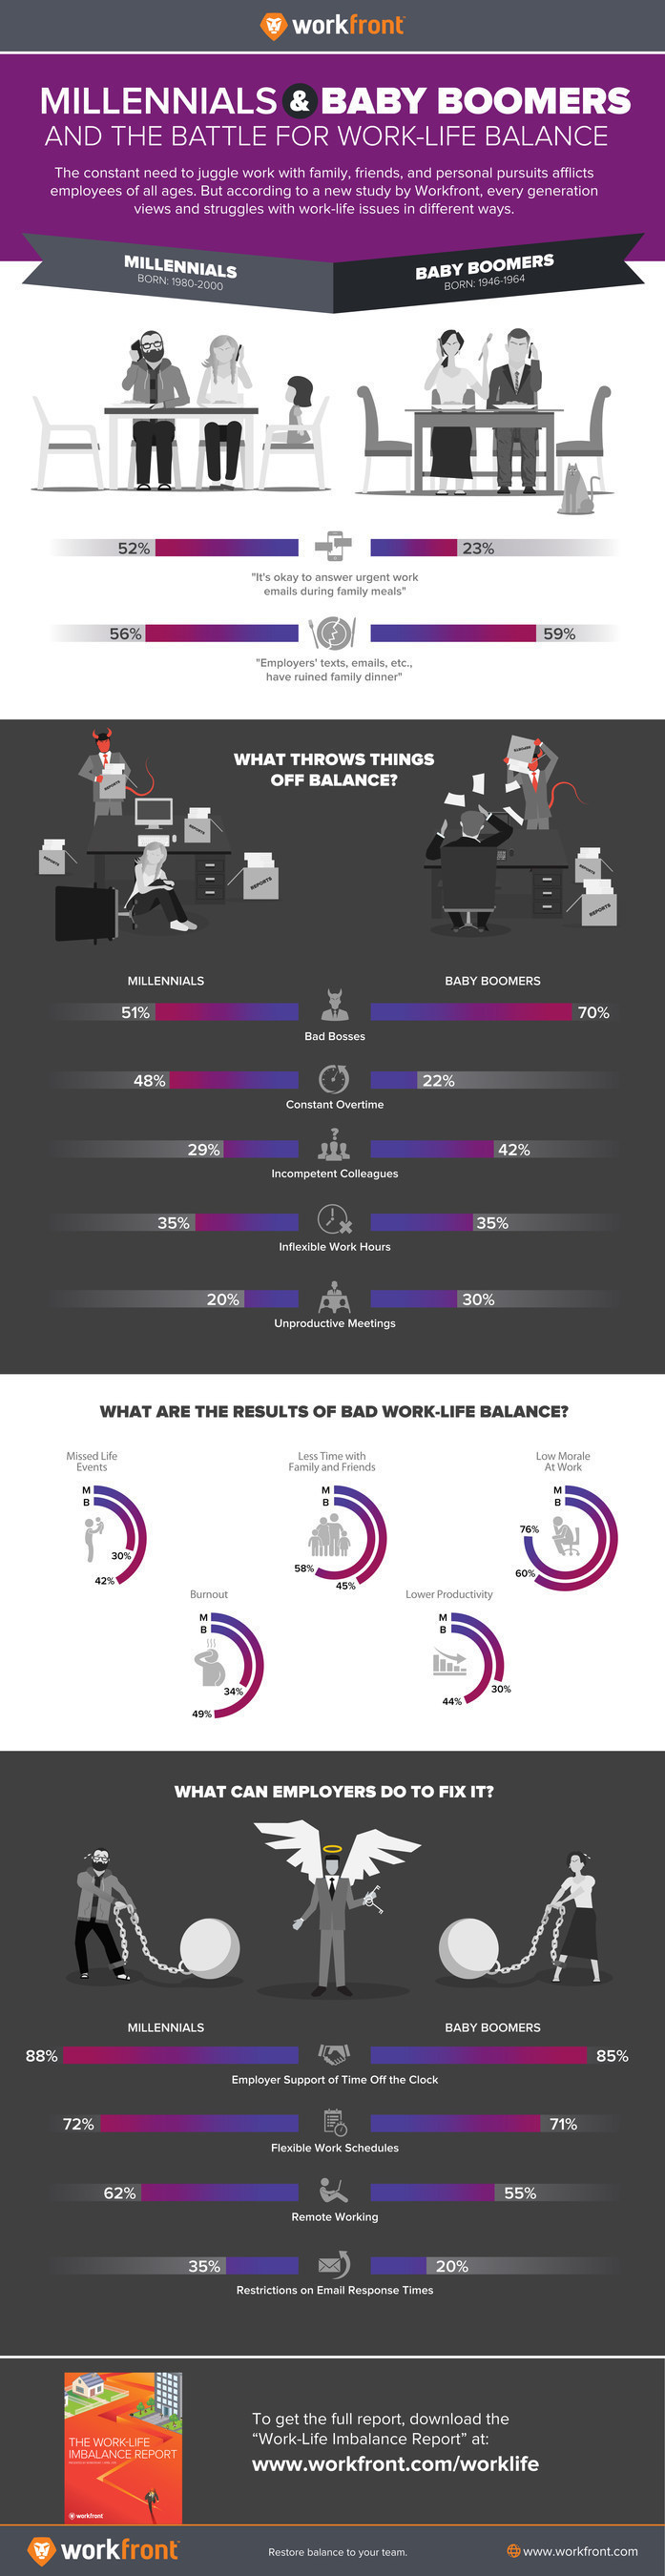 Workfront Survey Uncovers the Generational Differences in Perception of Work-Life Balance